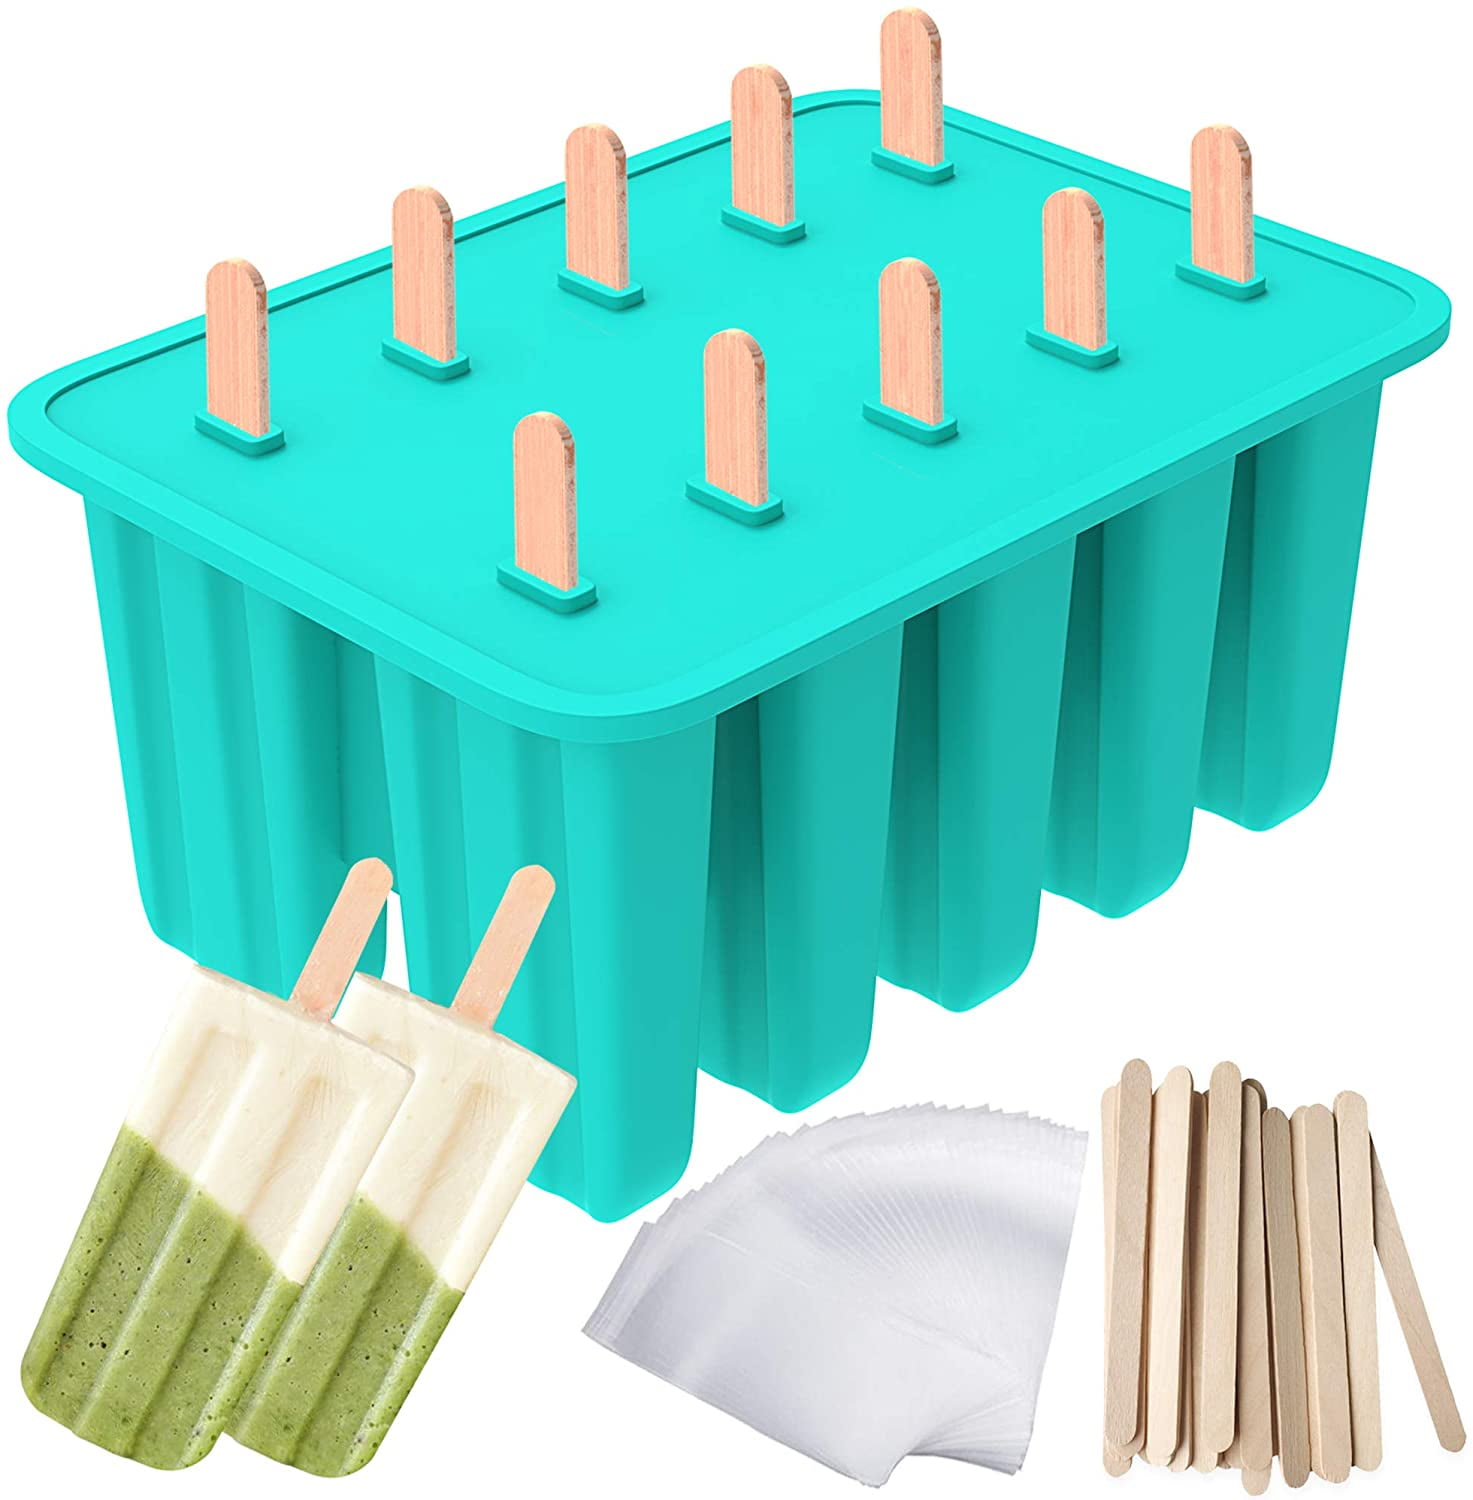 Popsicle Maker with 50 Wooden Sticks & 50 Popsicle Bags 4 Cavities Ice Pop Molds for Homemade Popsicles Ozera 2 Pack Silicone Popsicle Molds for Kids 